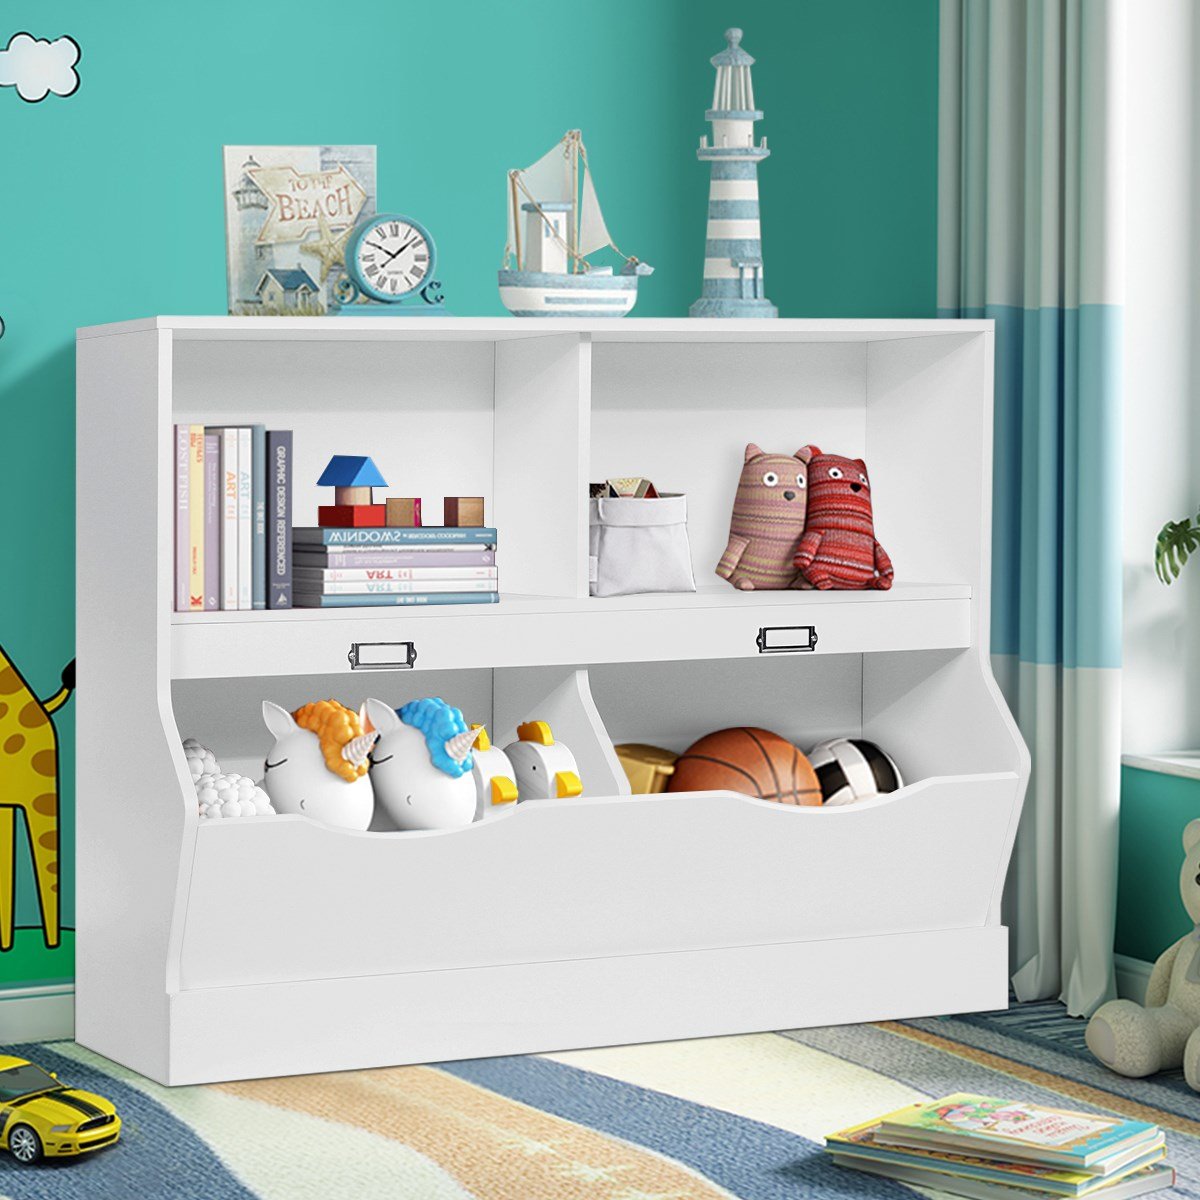 Woodyhome™ Storage Bookcase Kids Children Bookshelves w/ Opened Cabinets